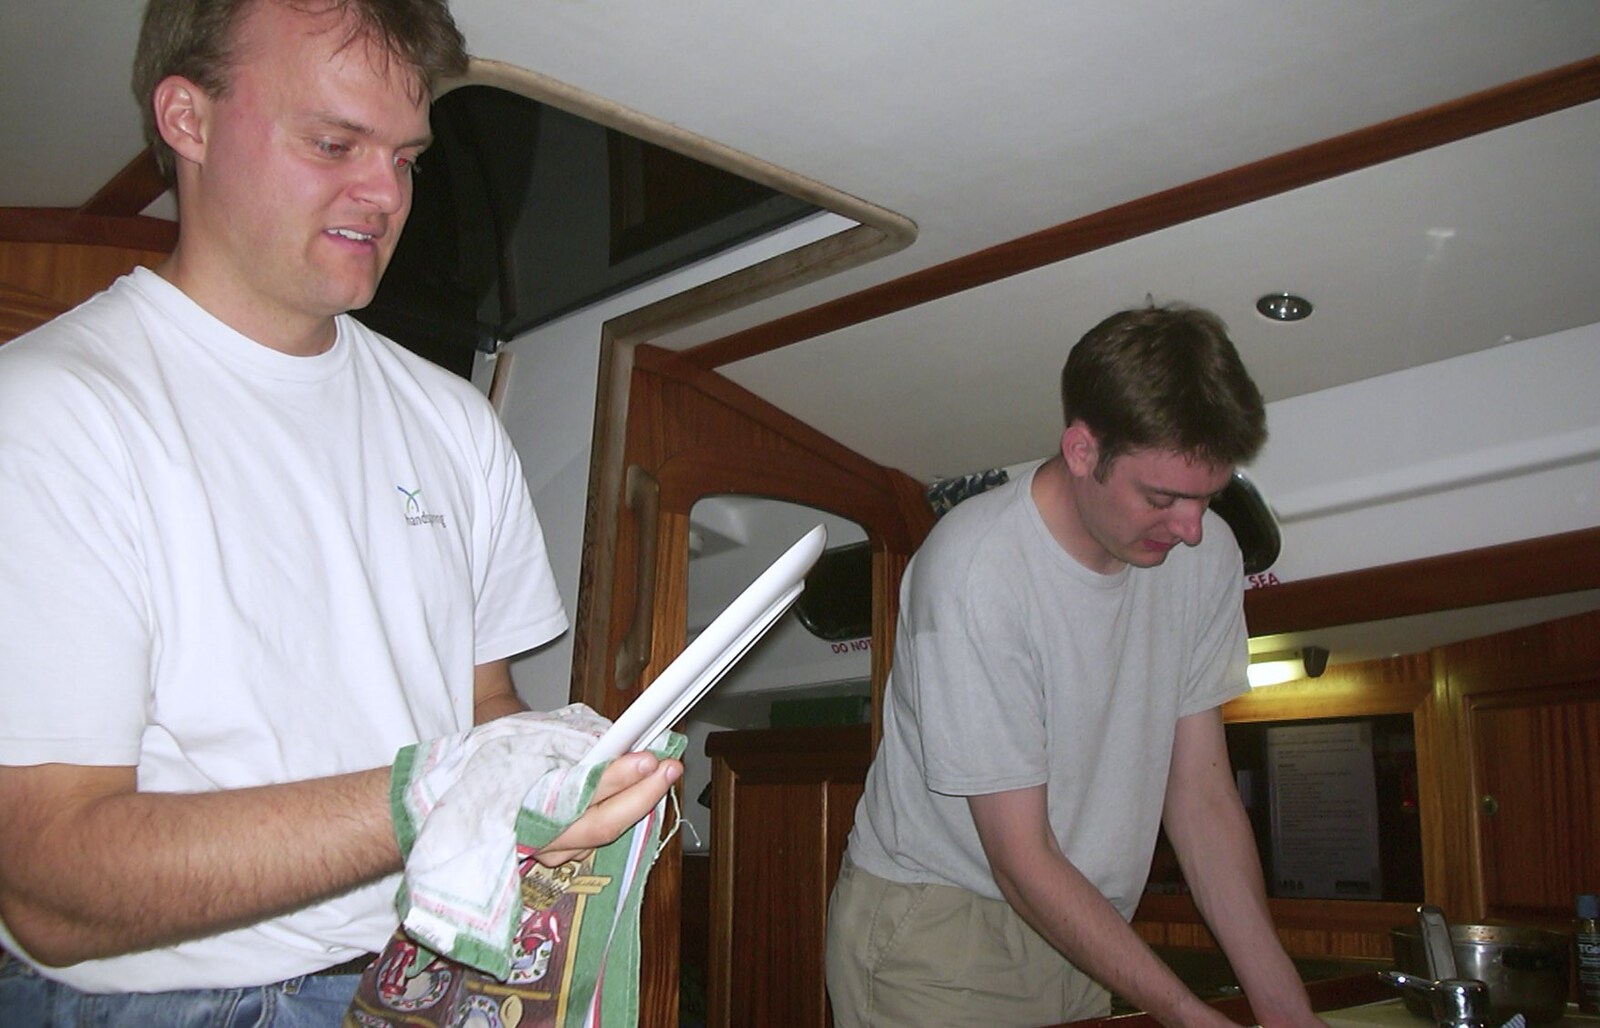 A 3G Lab Sailing Trip, Shotley, Suffolk - 6th September 2001: Nick and Stef wash up